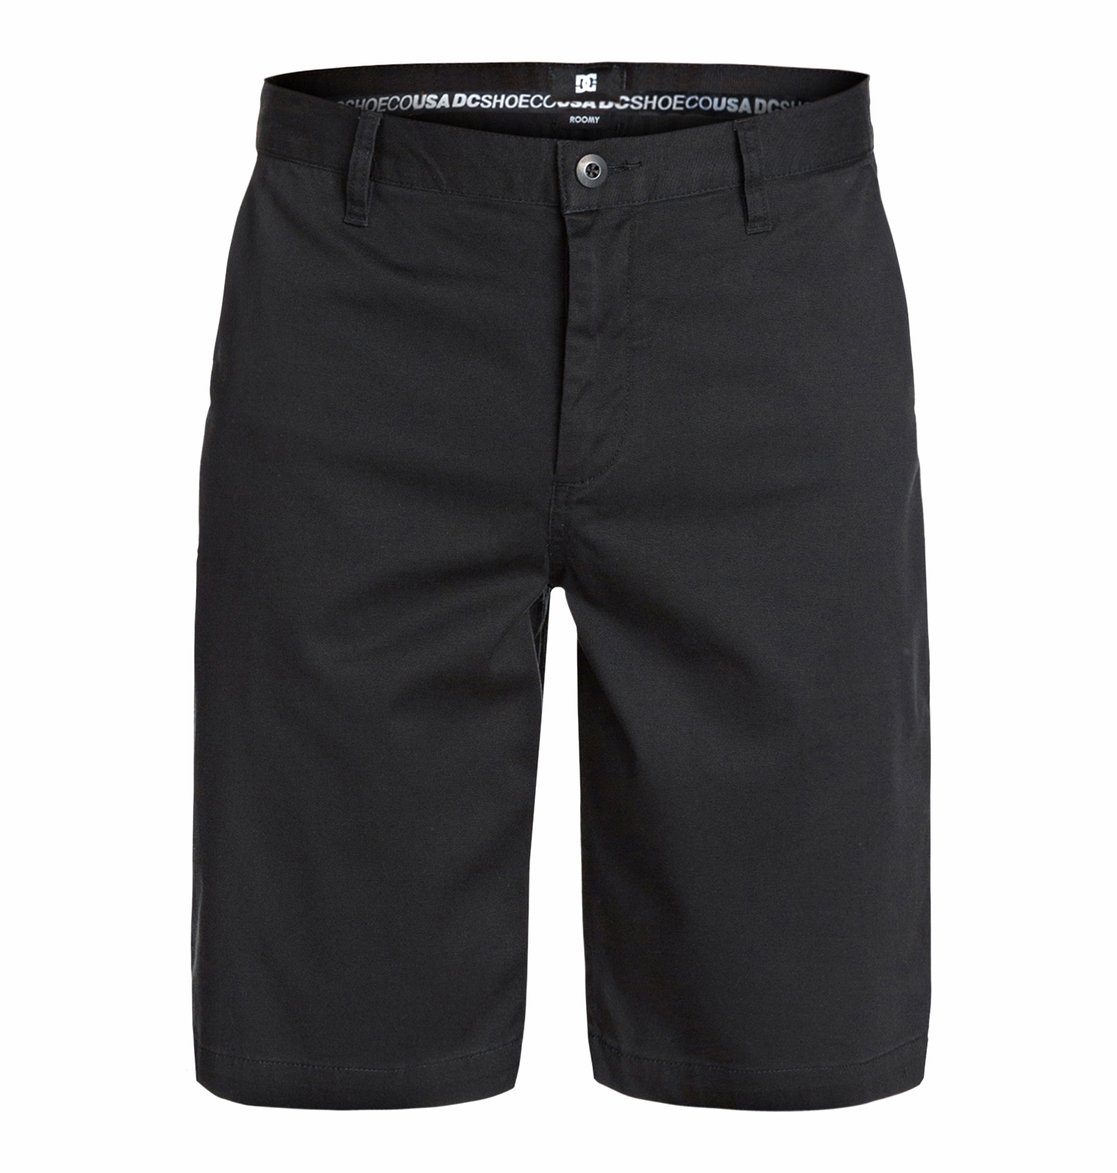 Worker Roomy 22 Shorts - Dcshoes   Worker Roomy 22 Shorts  DC Shoes -    